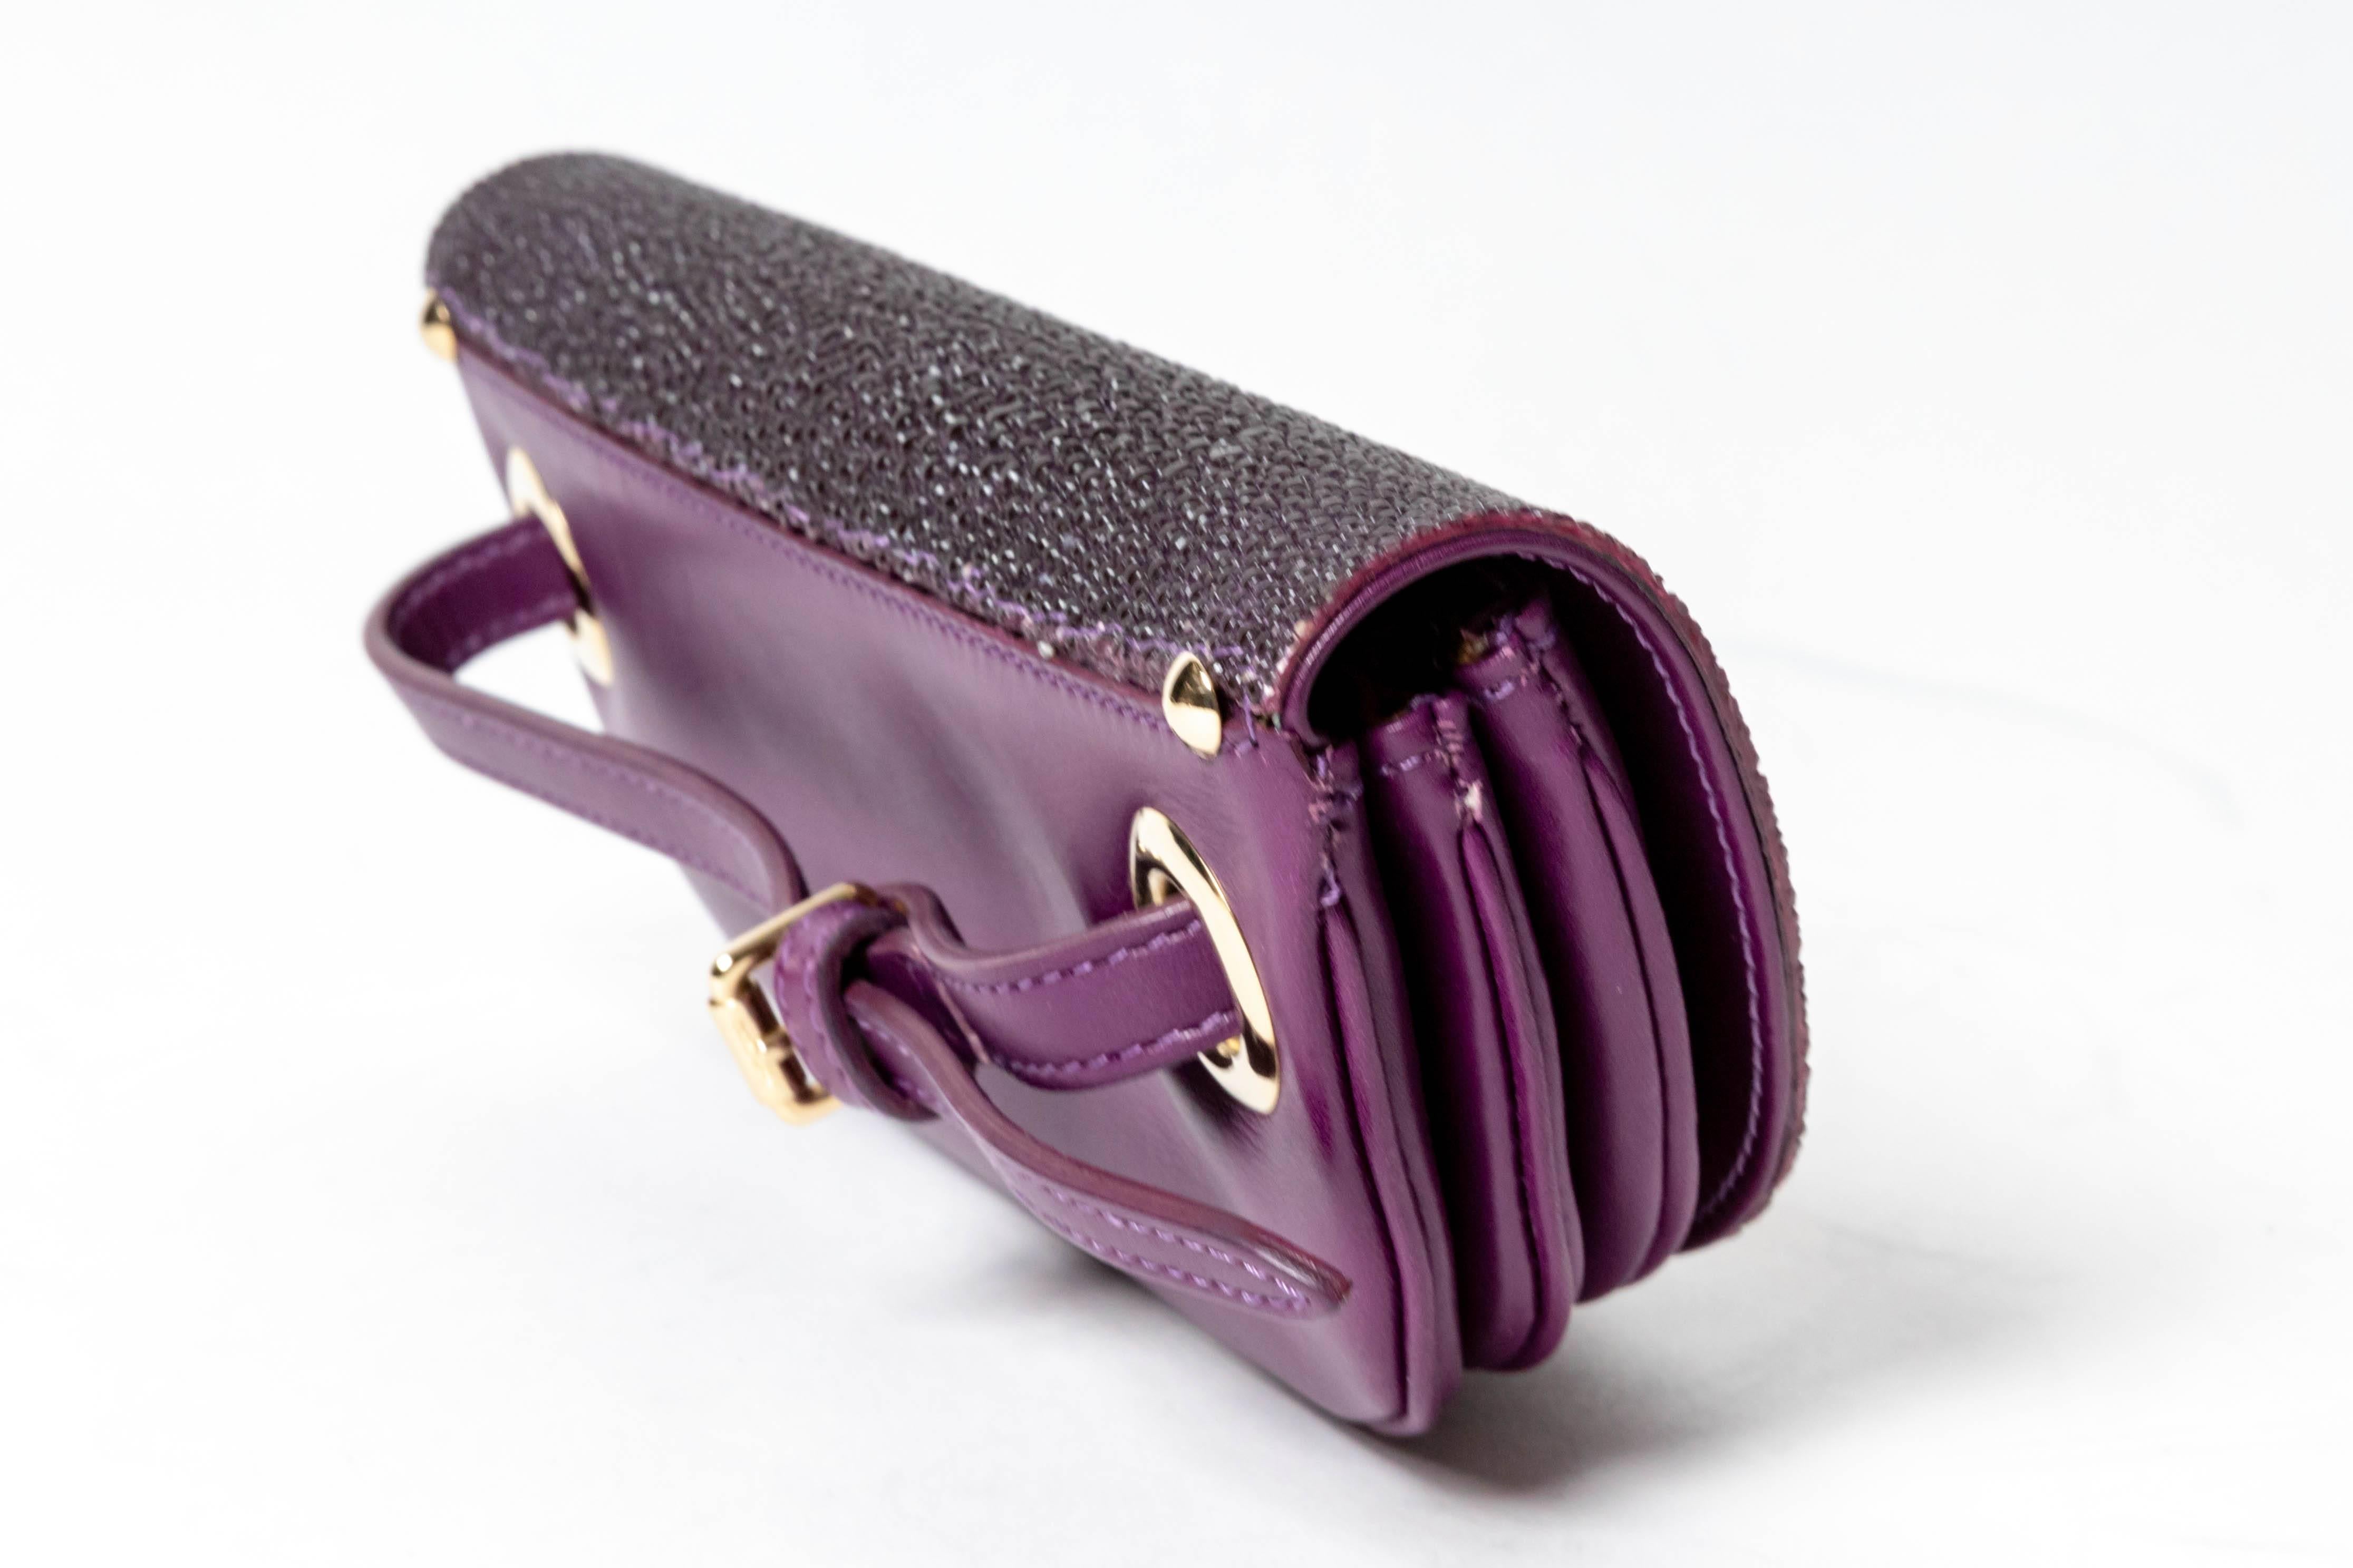 Jimmy Choo Shagreeen / Stingray Purple Clutch / Wristlet In Excellent Condition For Sale In Westhampton Beach, NY